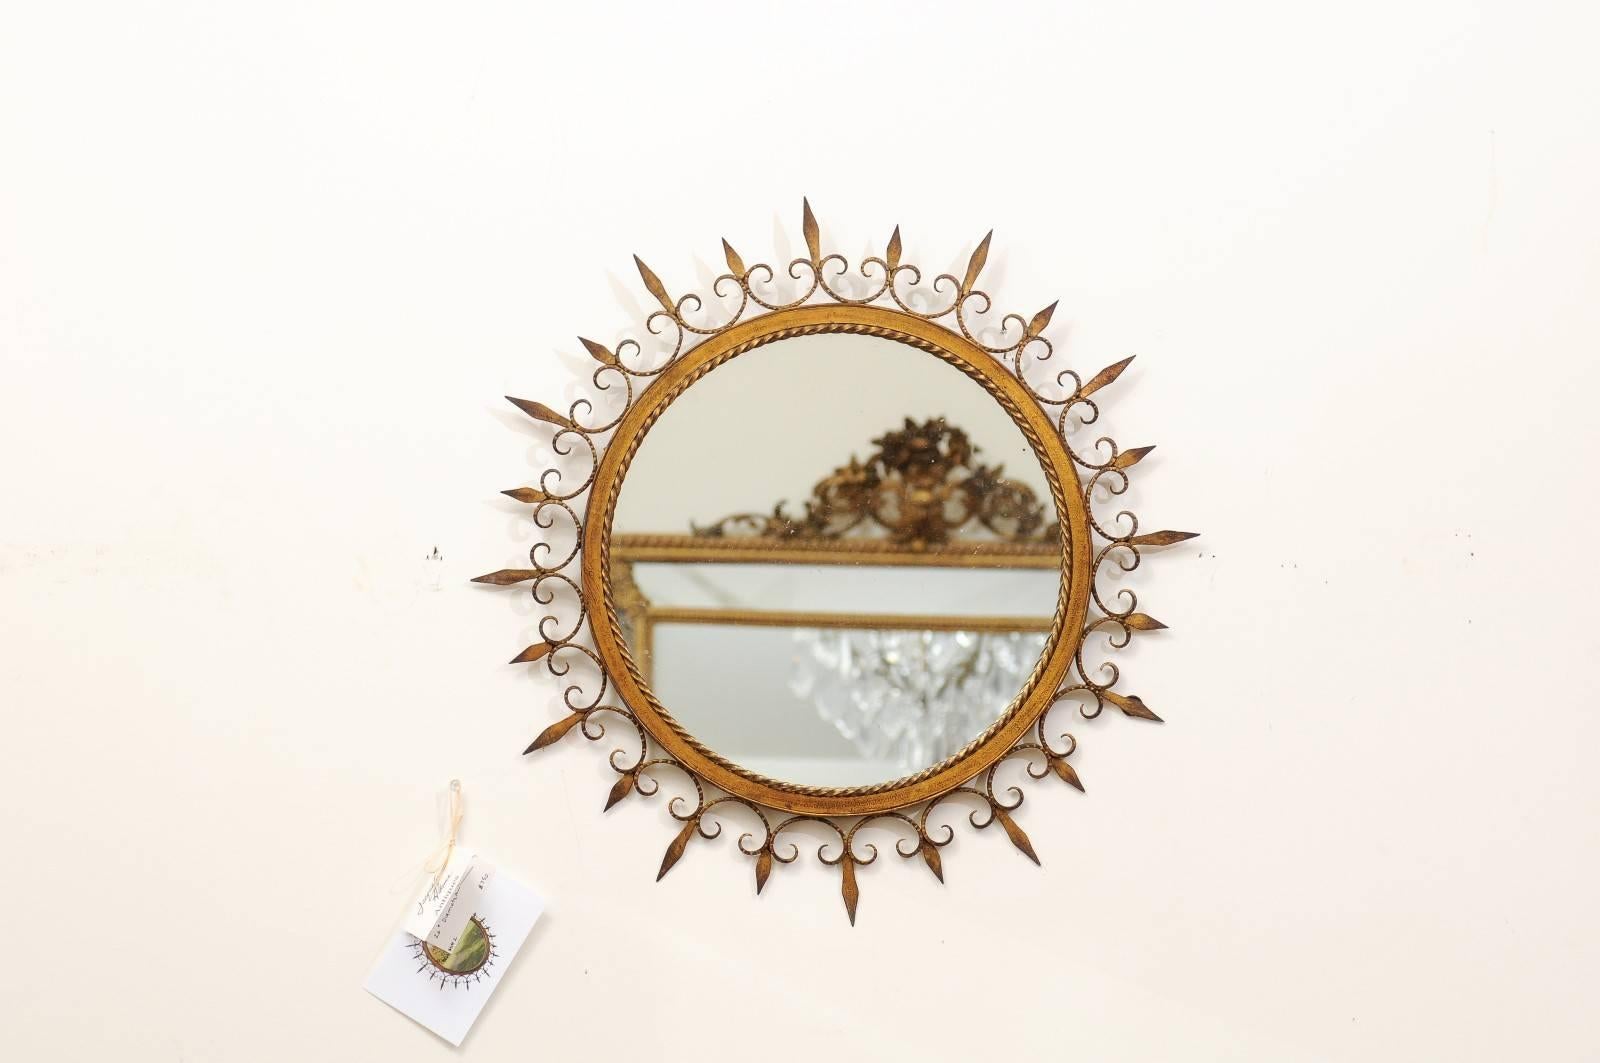 A French forged iron gilded sunburst mirror with stylized fleur-de-lys and braided molding from the midcentury. This French sunburst mirror was born in the 1950s and features a clear mirrored glass in the center, delicately surrounded by a braided